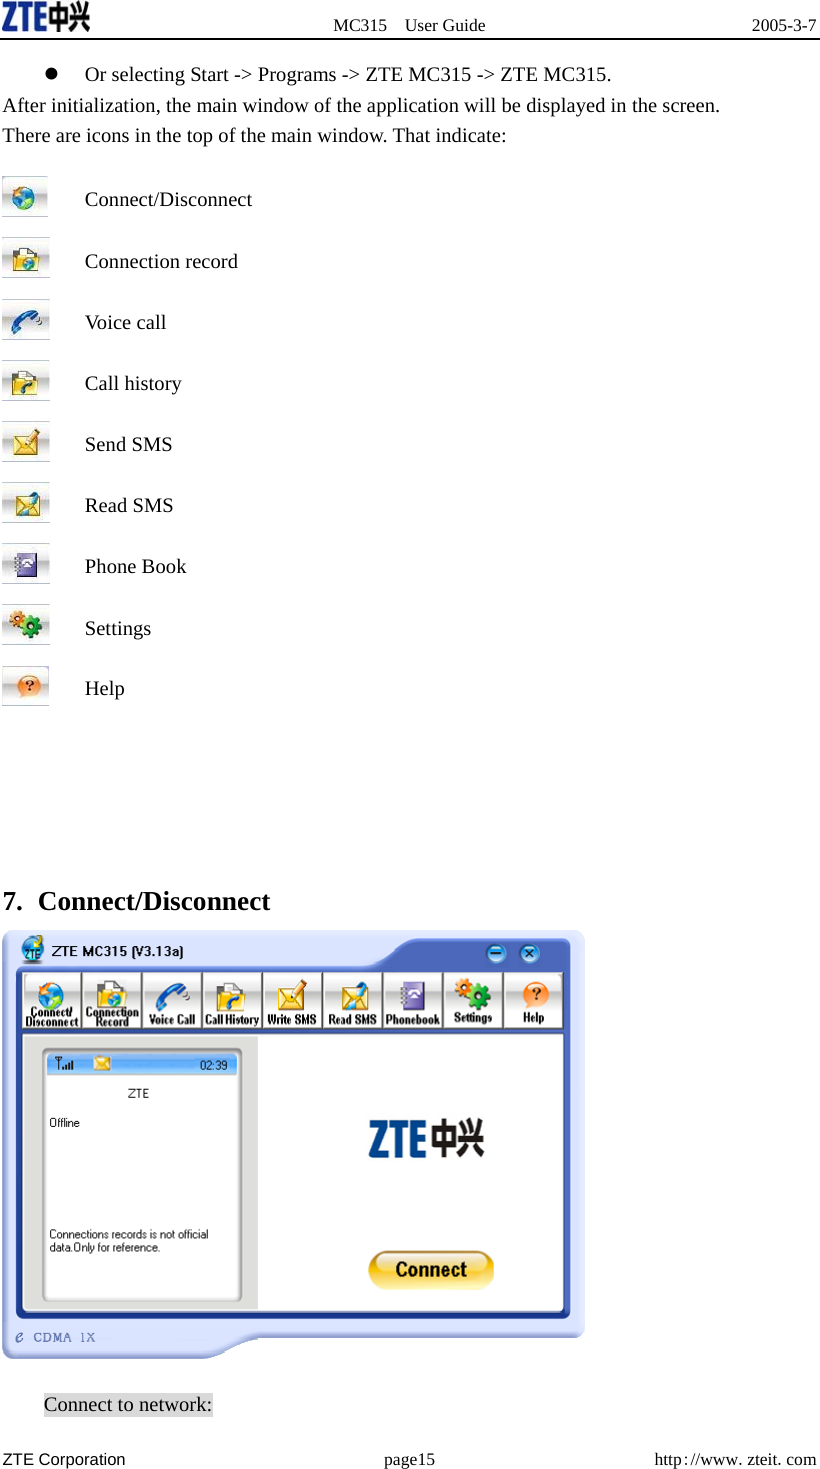  MC315 User Guide  2005-3-7  ZTE Corporation page15 http://www.zteit.com   Or selecting Start -&gt; Programs -&gt; ZTE MC315 -&gt; ZTE MC315. After initialization, the main window of the application will be displayed in the screen. There are icons in the top of the main window. That indicate:  Connect/Disconnect  Connection record  Voice call  Call history  Send SMS  Read SMS  Phone Book  Settings  Help      7. Connect/Disconnect   Connect to network: 